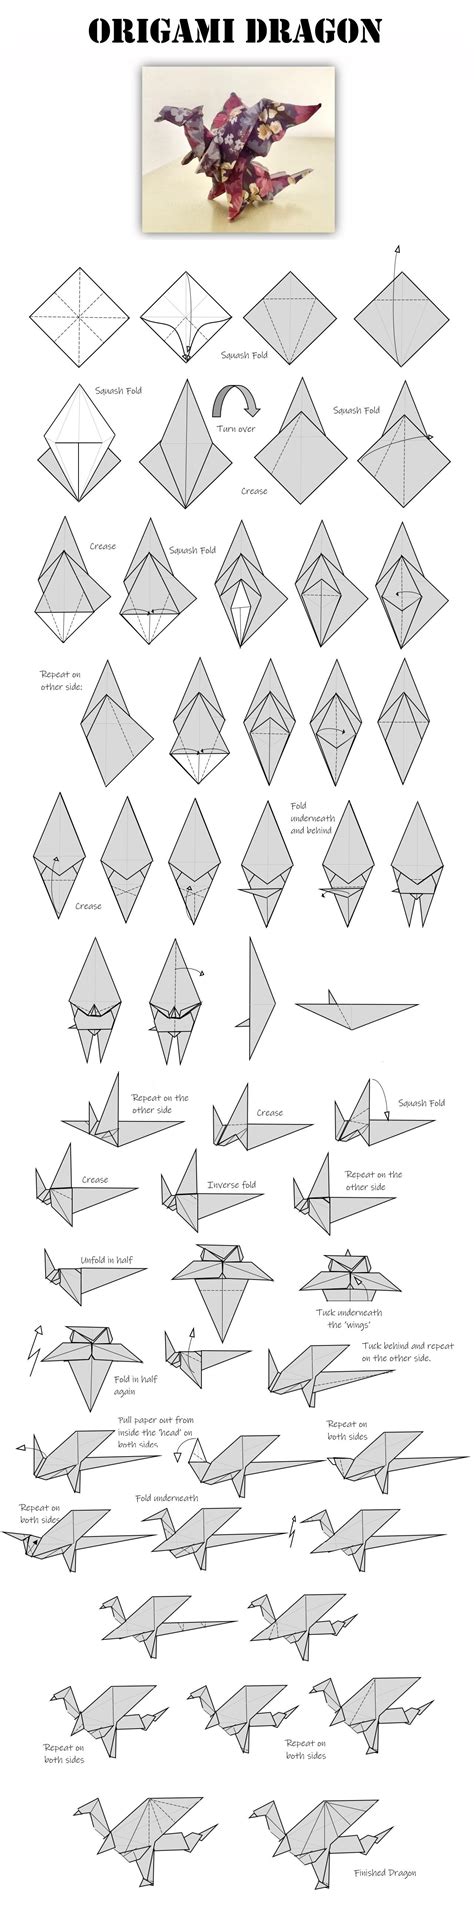 Origami Ideas Origami Instructions For A Dragon